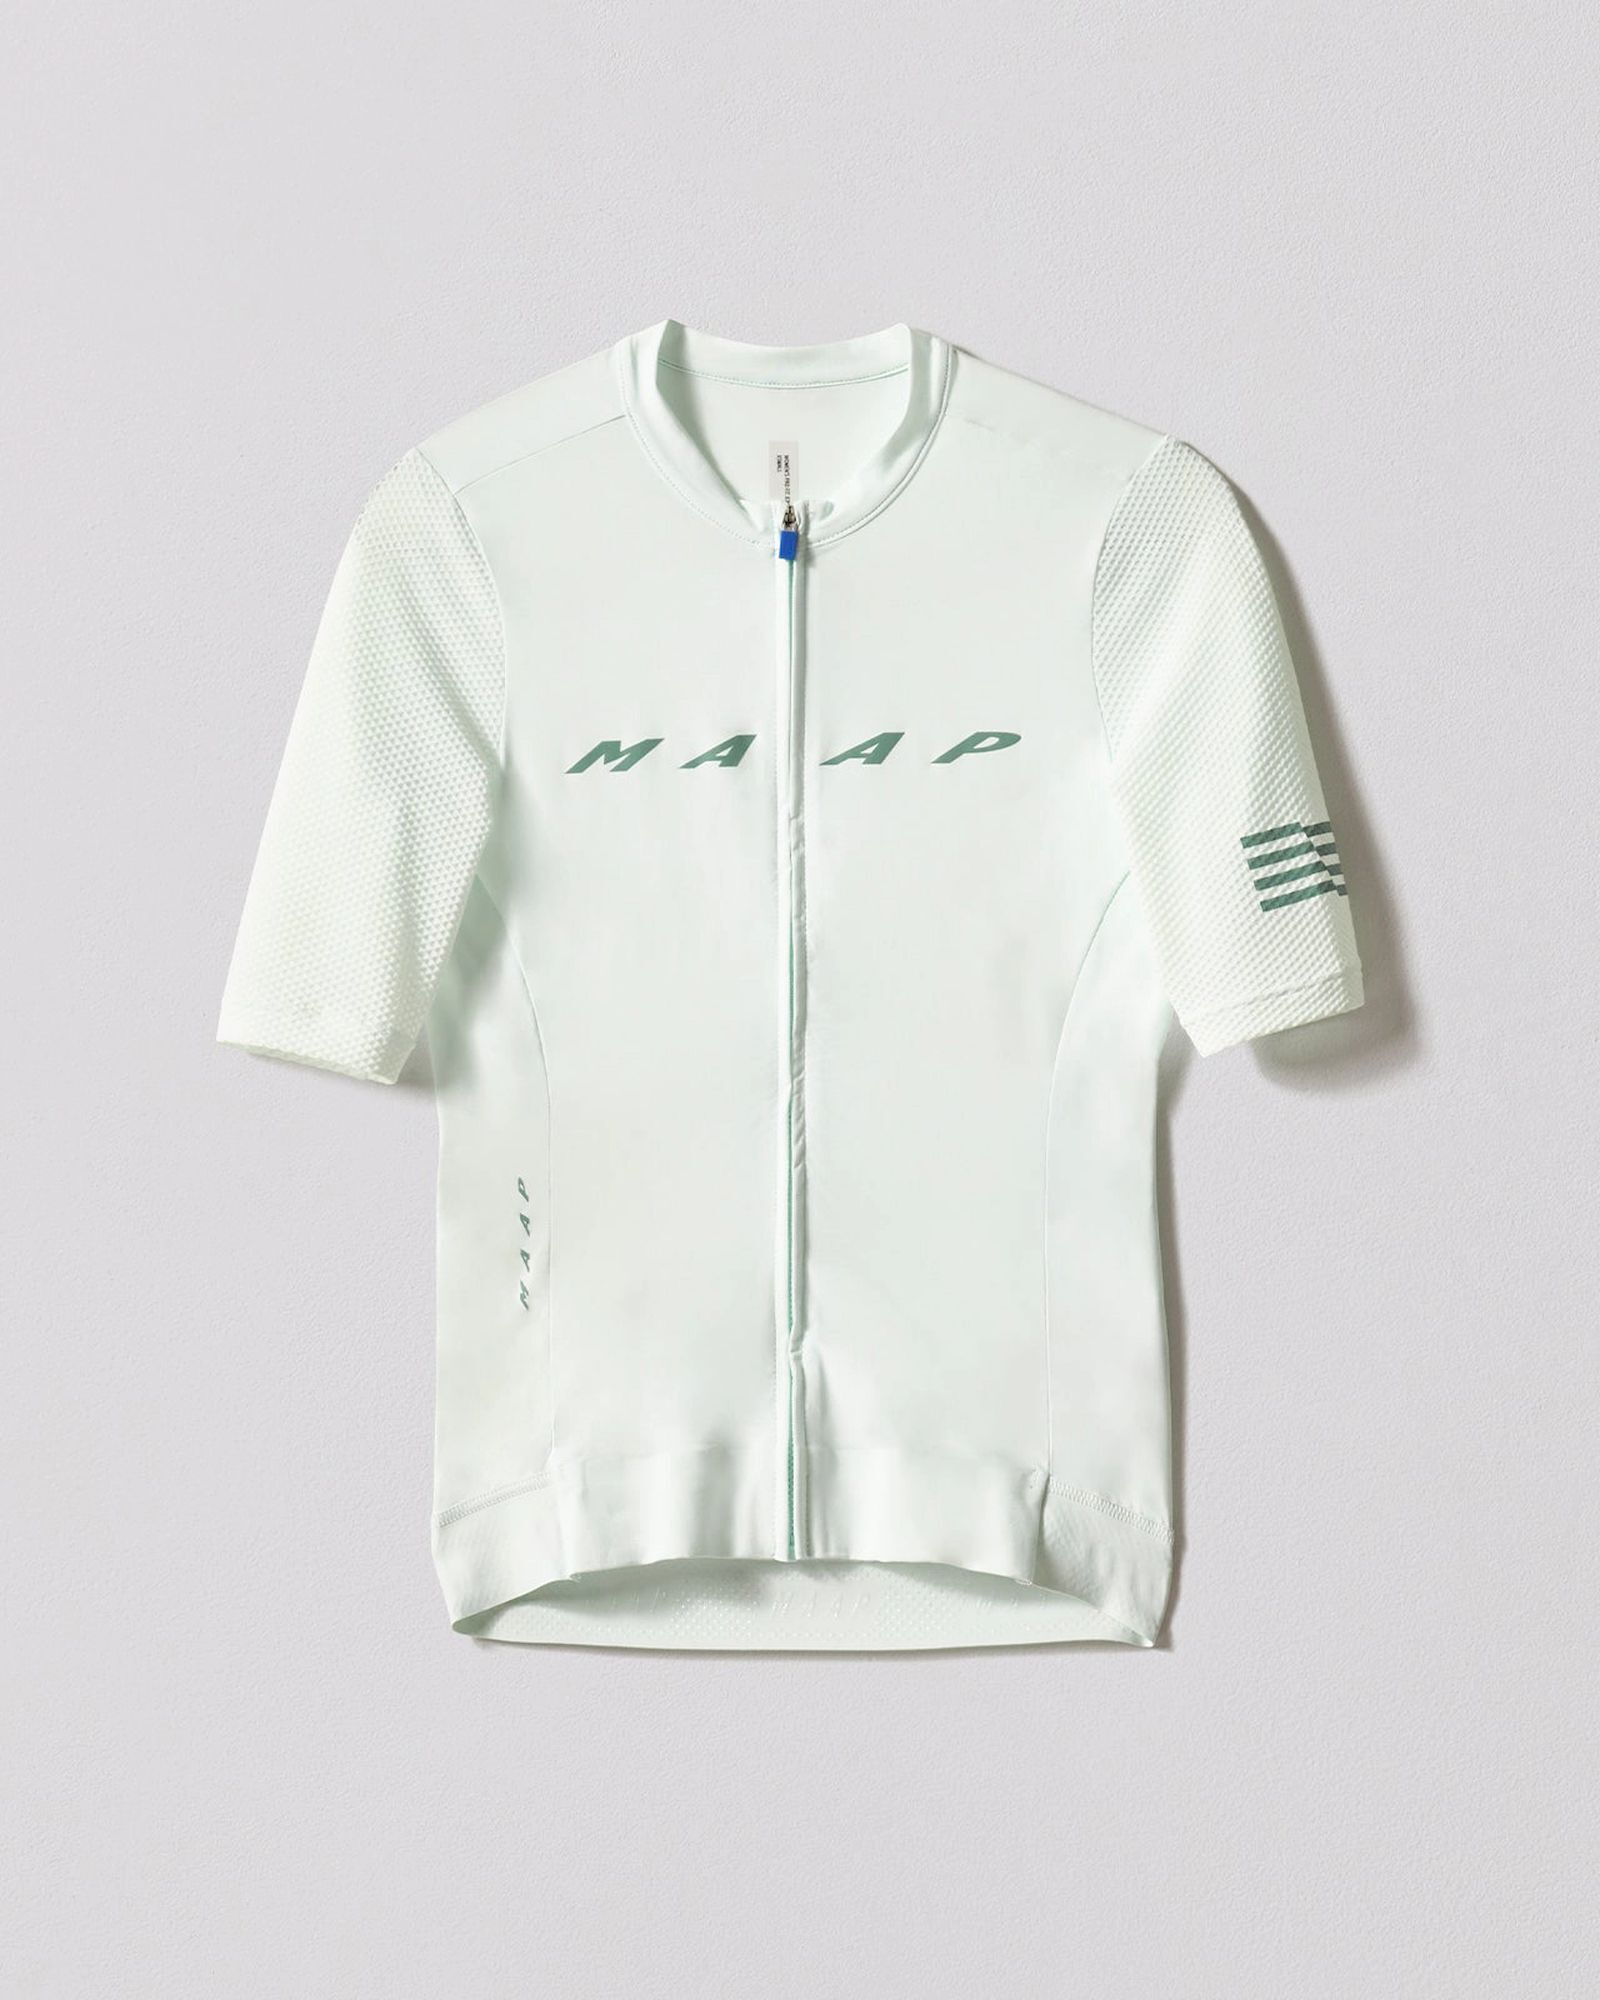 Maap Women's Evade Pro Base Jersey 2.0 - Maglia ciclismo - Donna | Hardloop